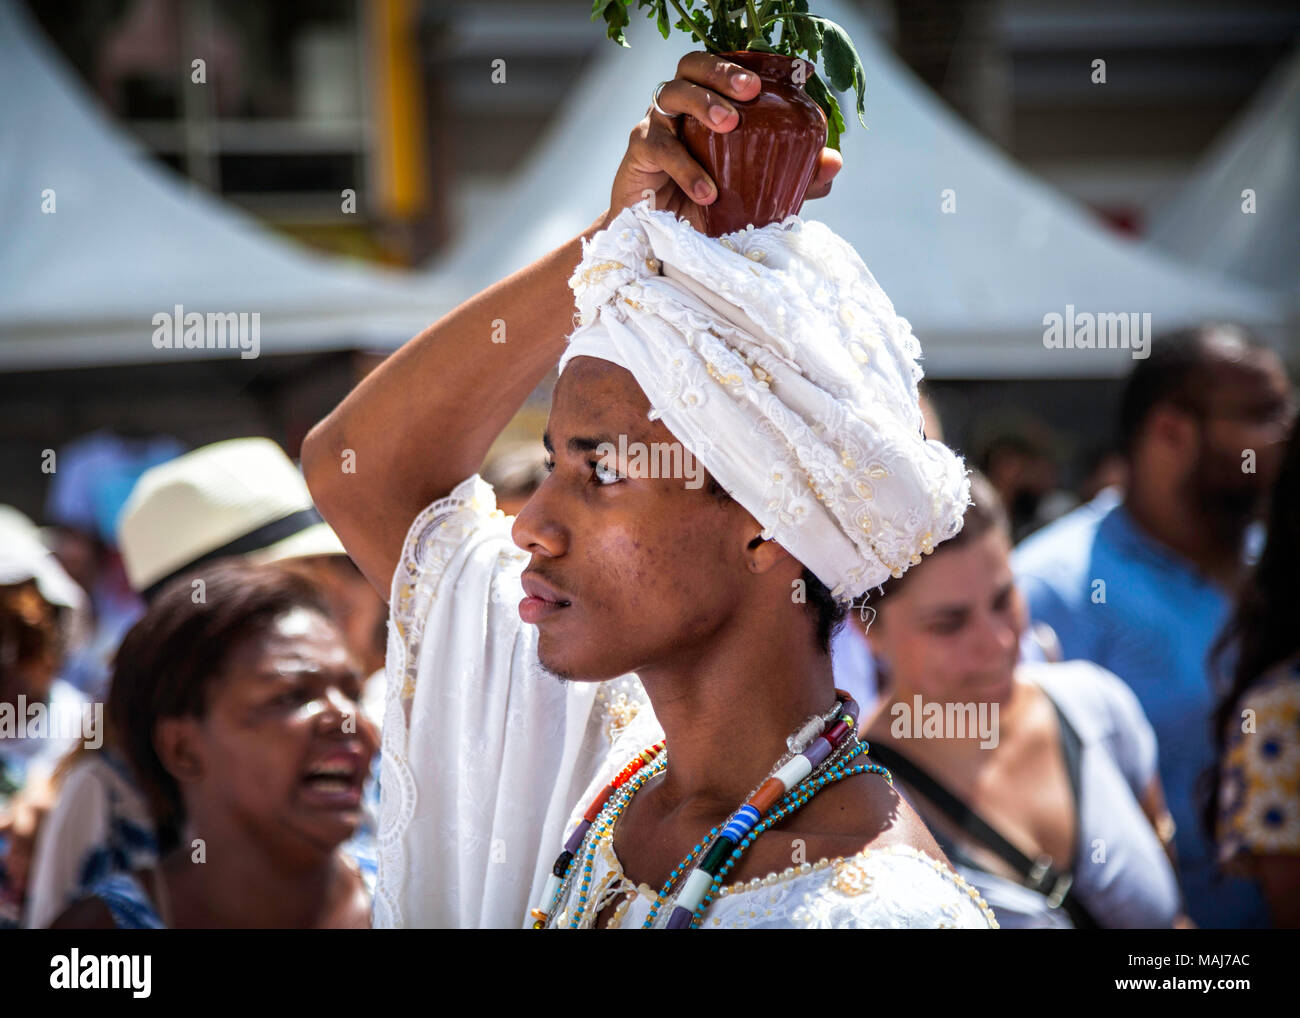 Campinas, SP Brazil - April 1 2018: practicioners of afro-brazilian religions perform a cleansing ritual during easter cerimonies Stock Photo